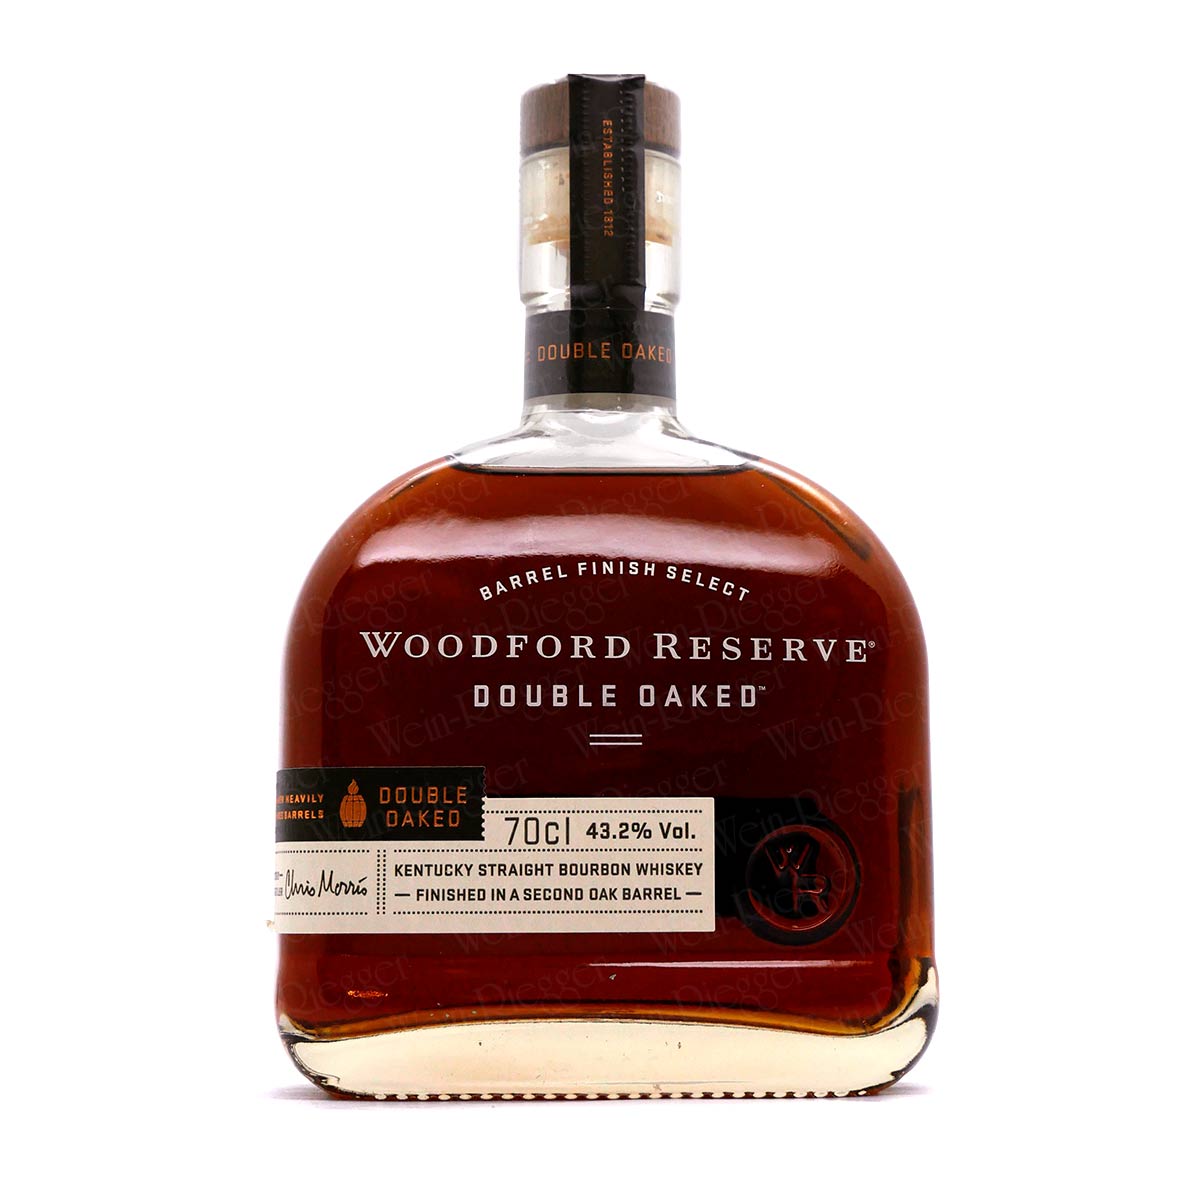 Woodford Reserve DOUBLE OAKED - Kentucky Straight Bourbon Whiskey